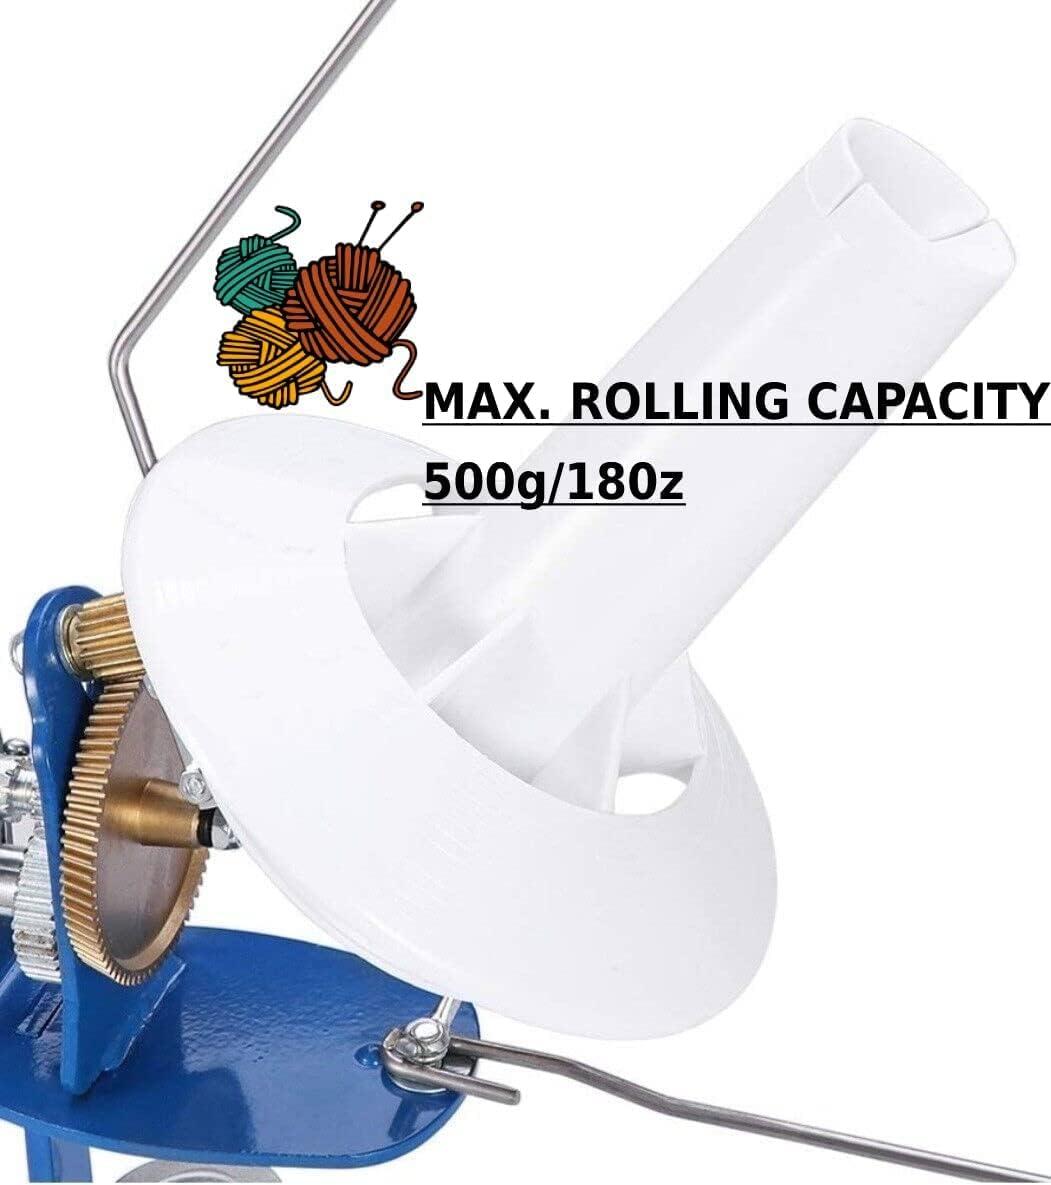 Best Deal for Yarn Ball Winder - Manual Hand Operated Roll String Yarn